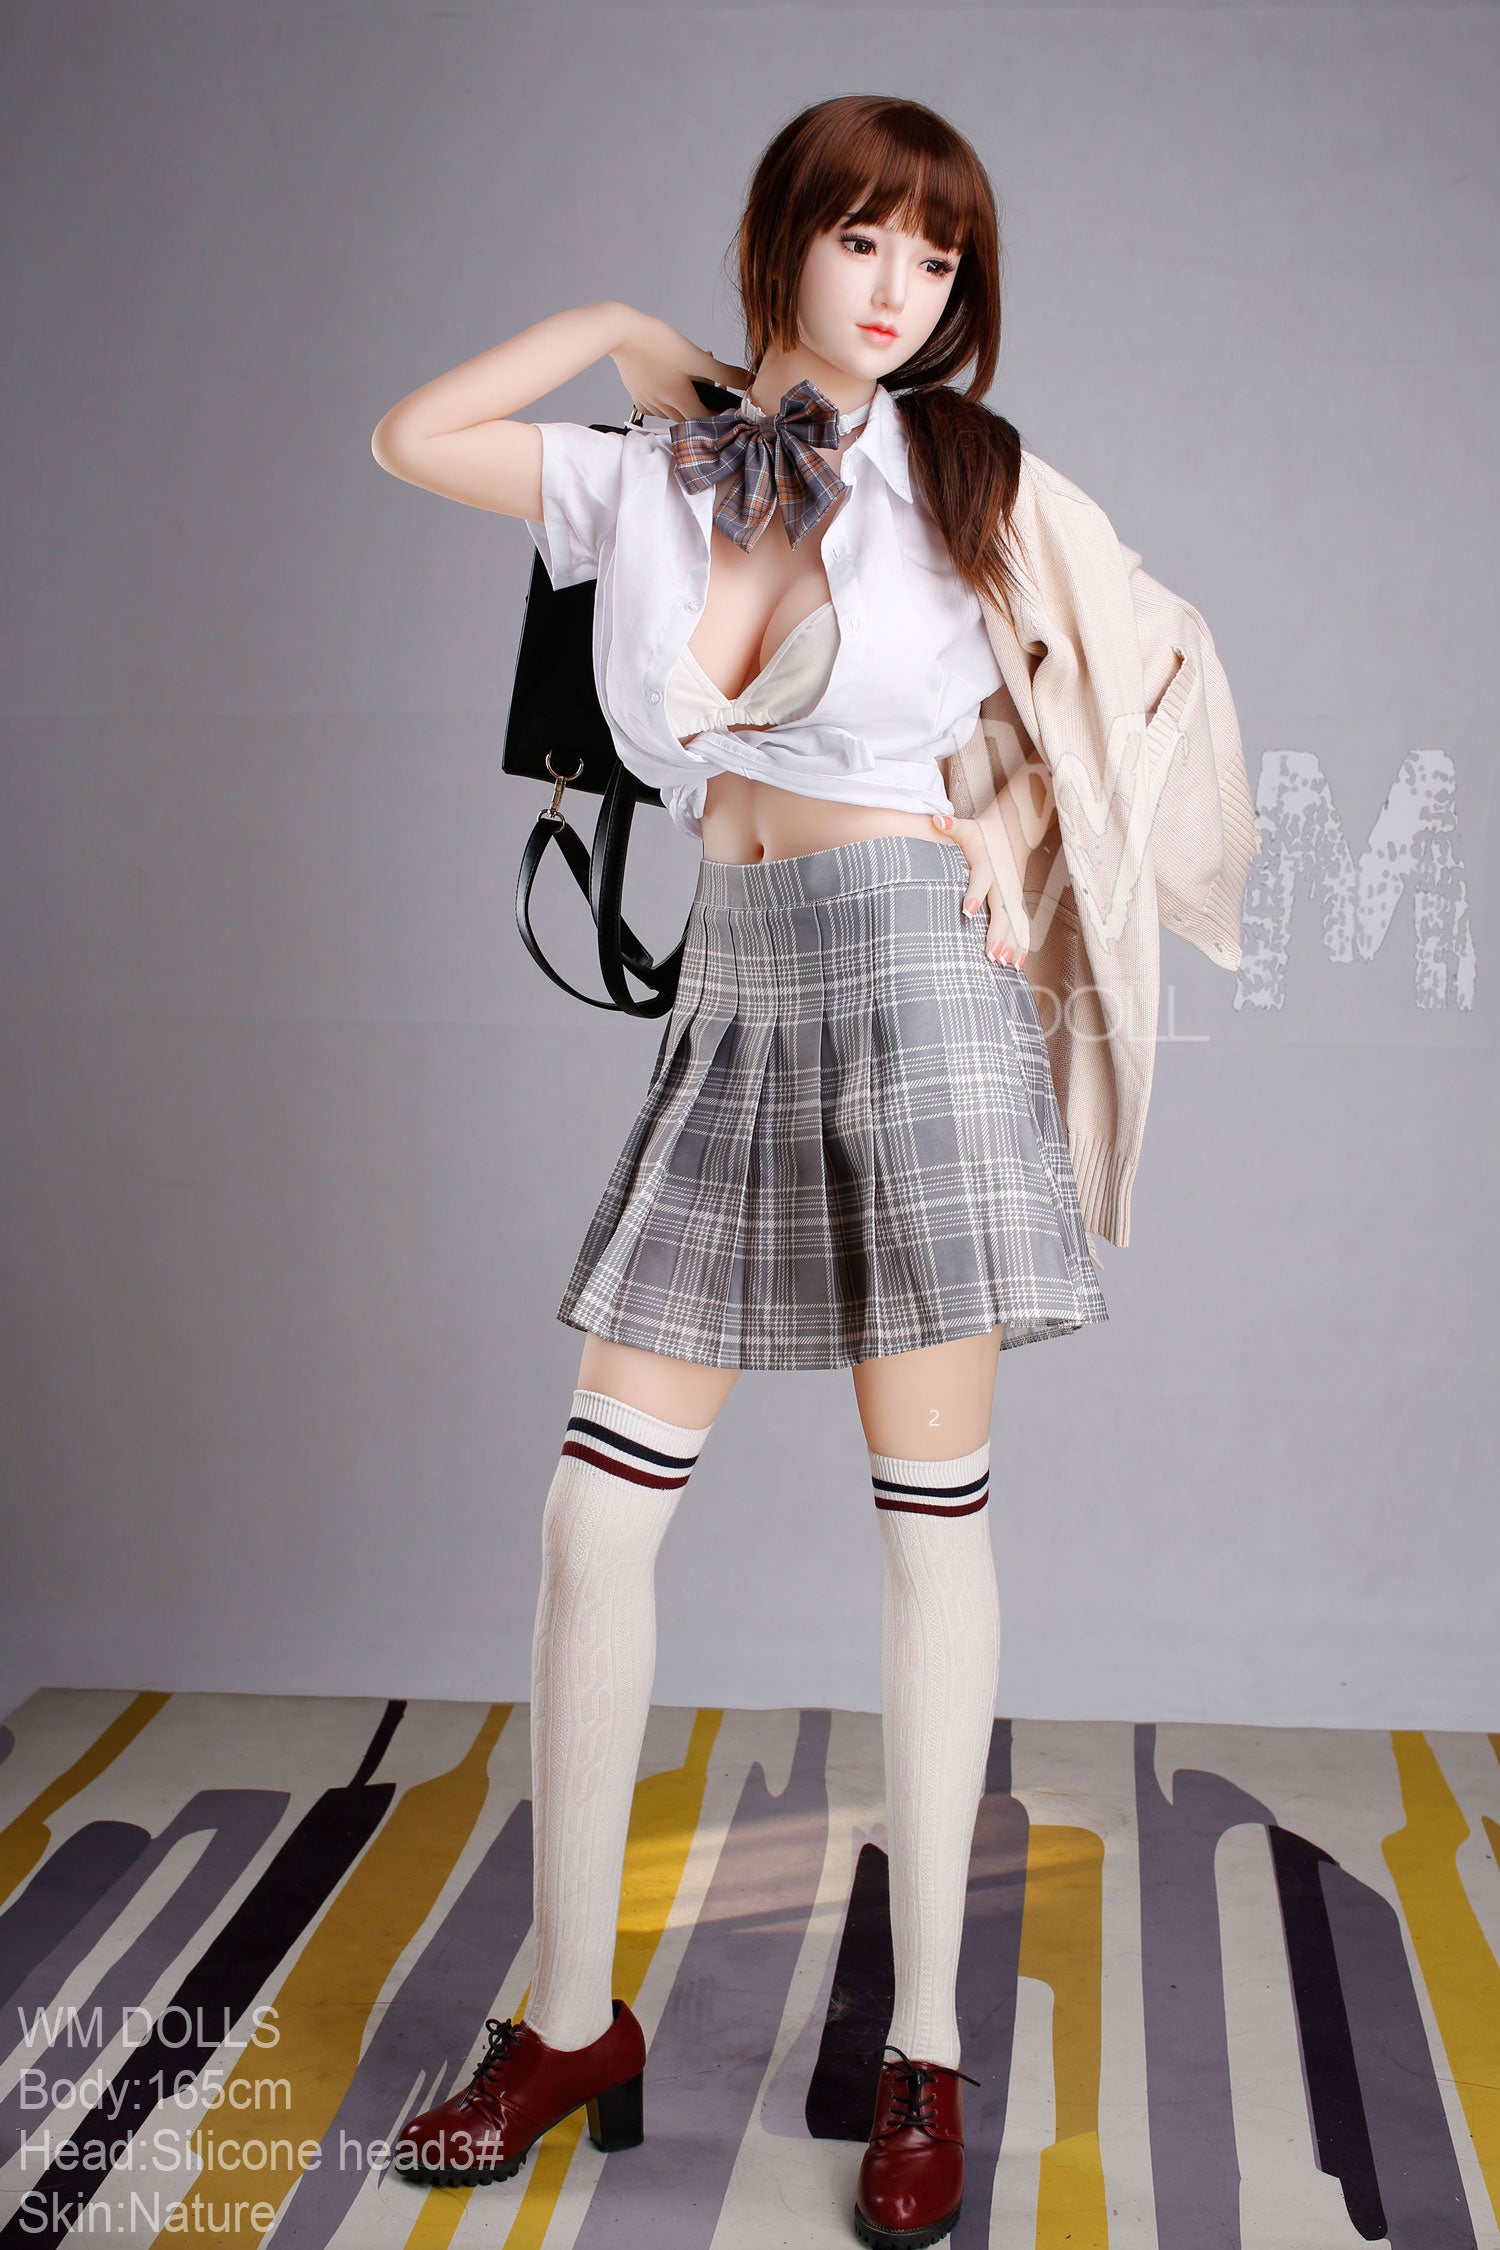 Yoko Japanese School Girl Sex Doll Premium Silicone And Tpa Life Size Realistic Luxury Sex Doll